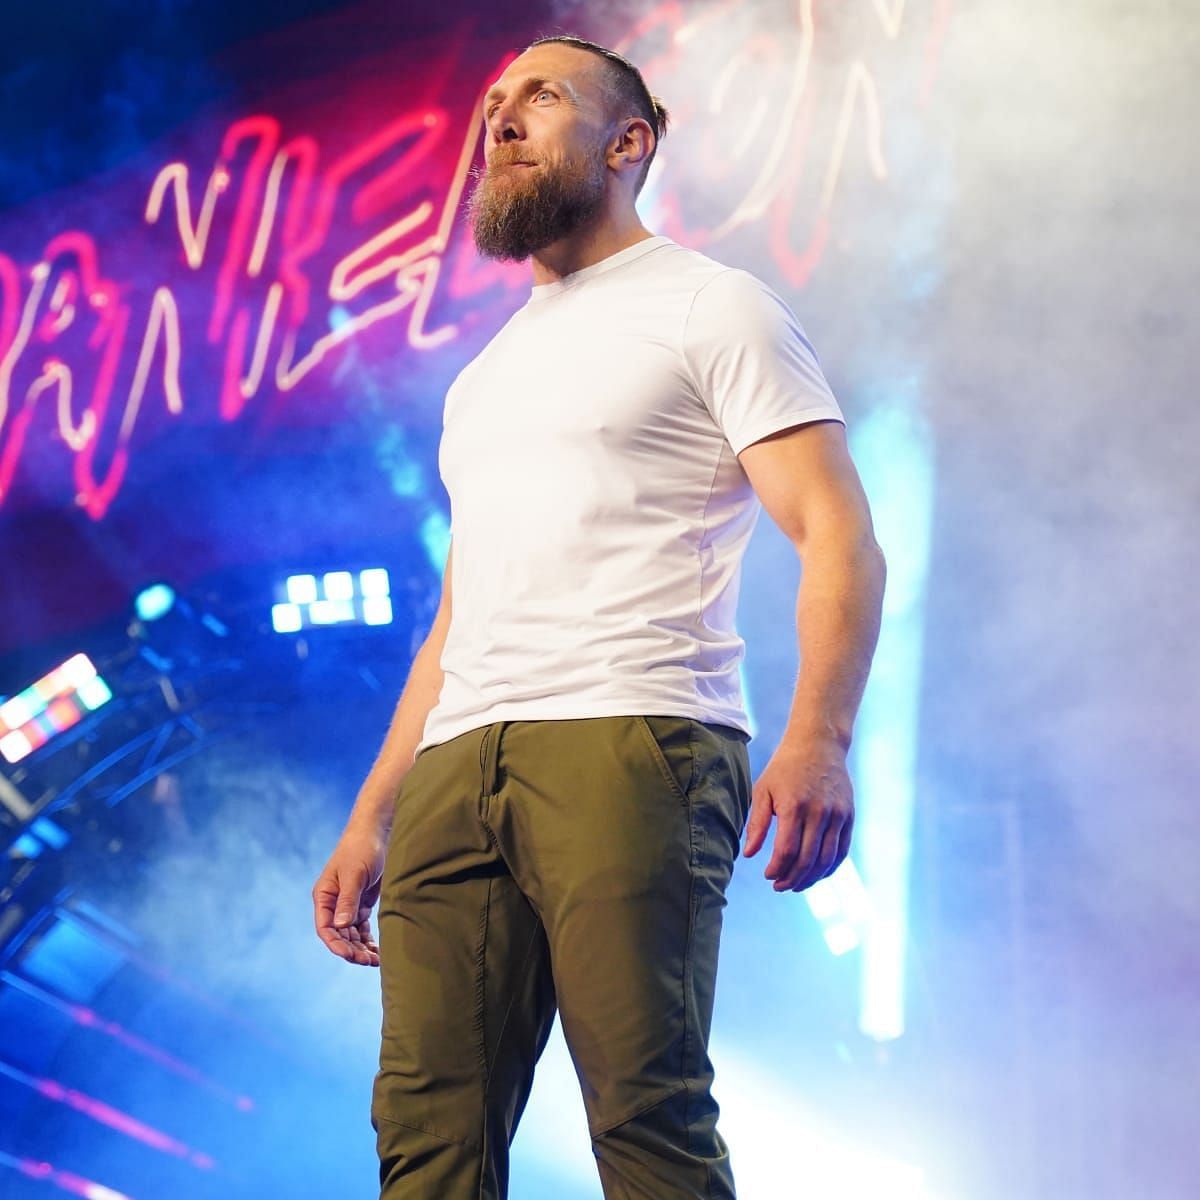 Bryan Danielson shocked the world with his AEW debut